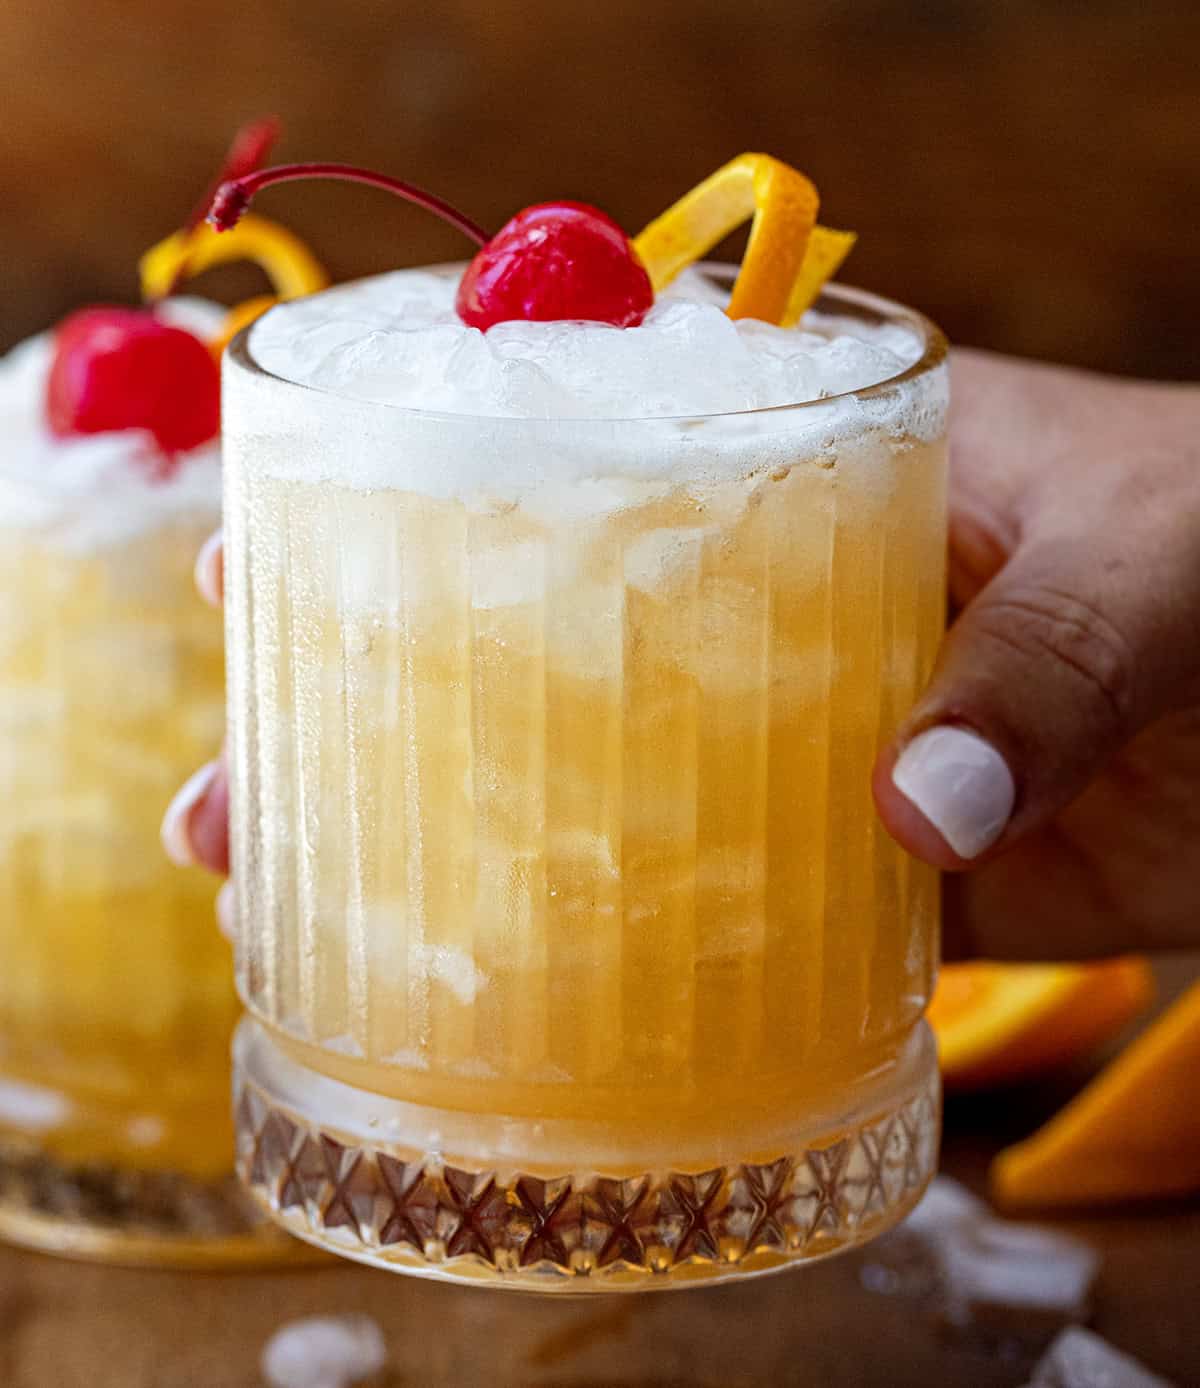 Hand holding a glass filled with the Amaretto Sour drink.